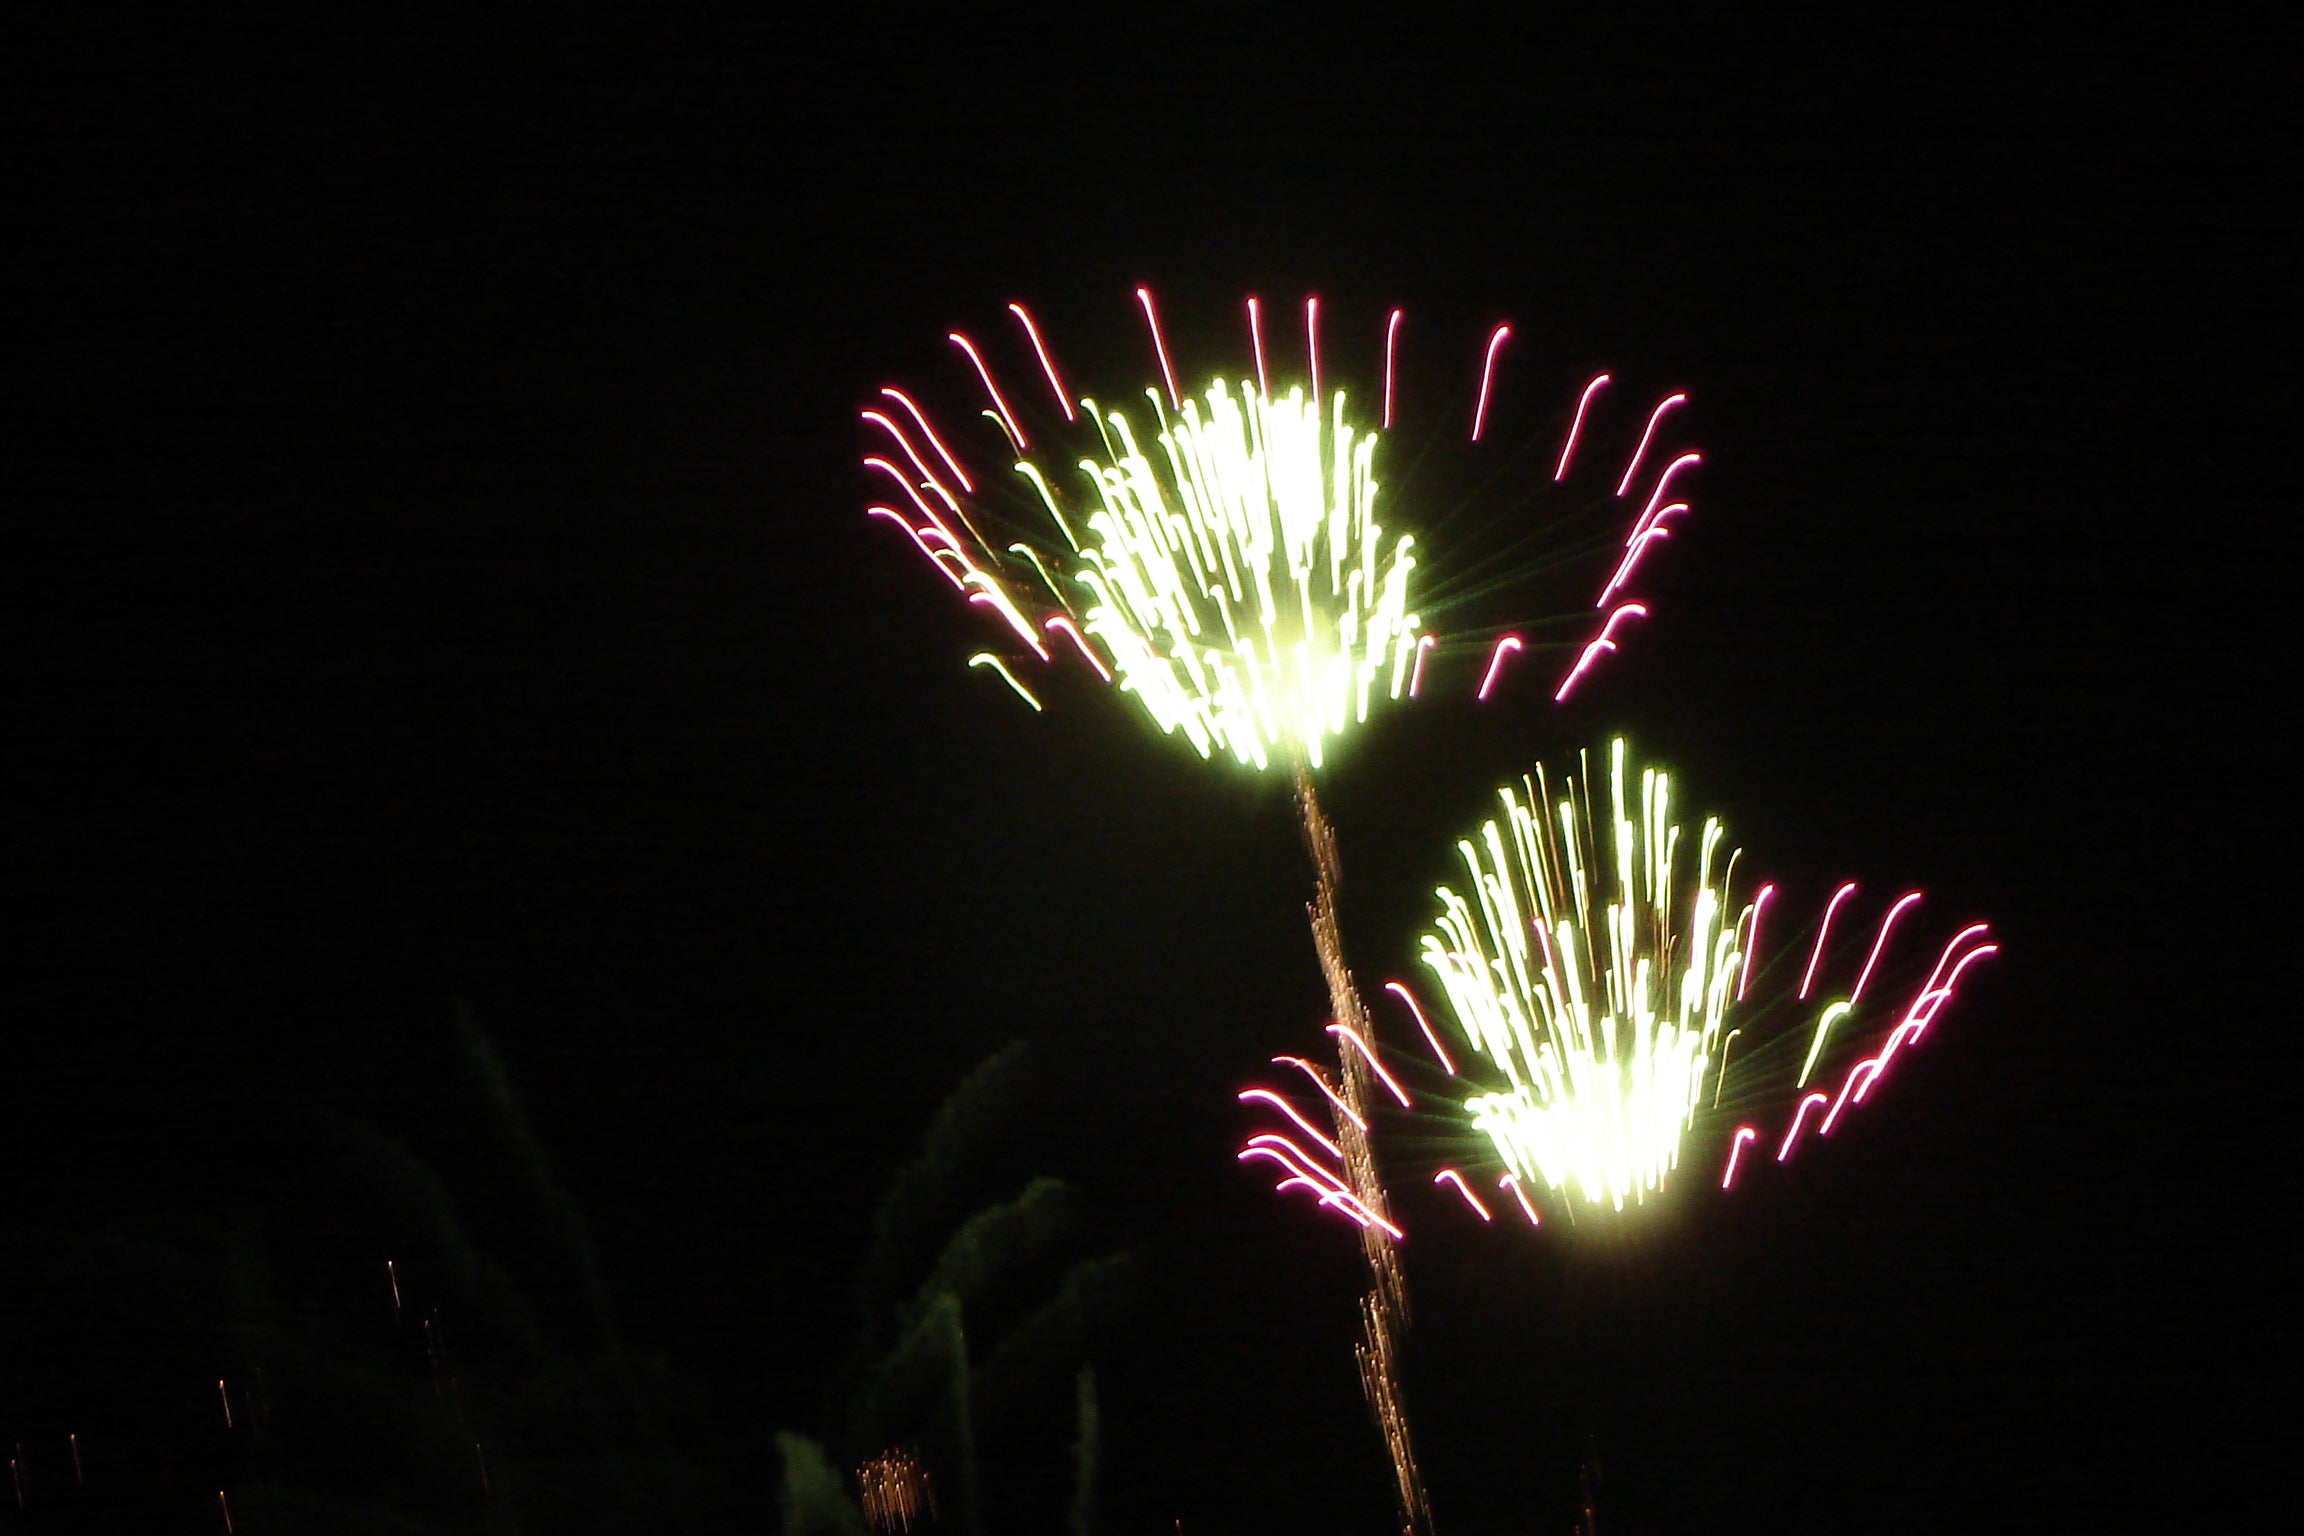 Two fireworks exploding in the sky. They look like flowers